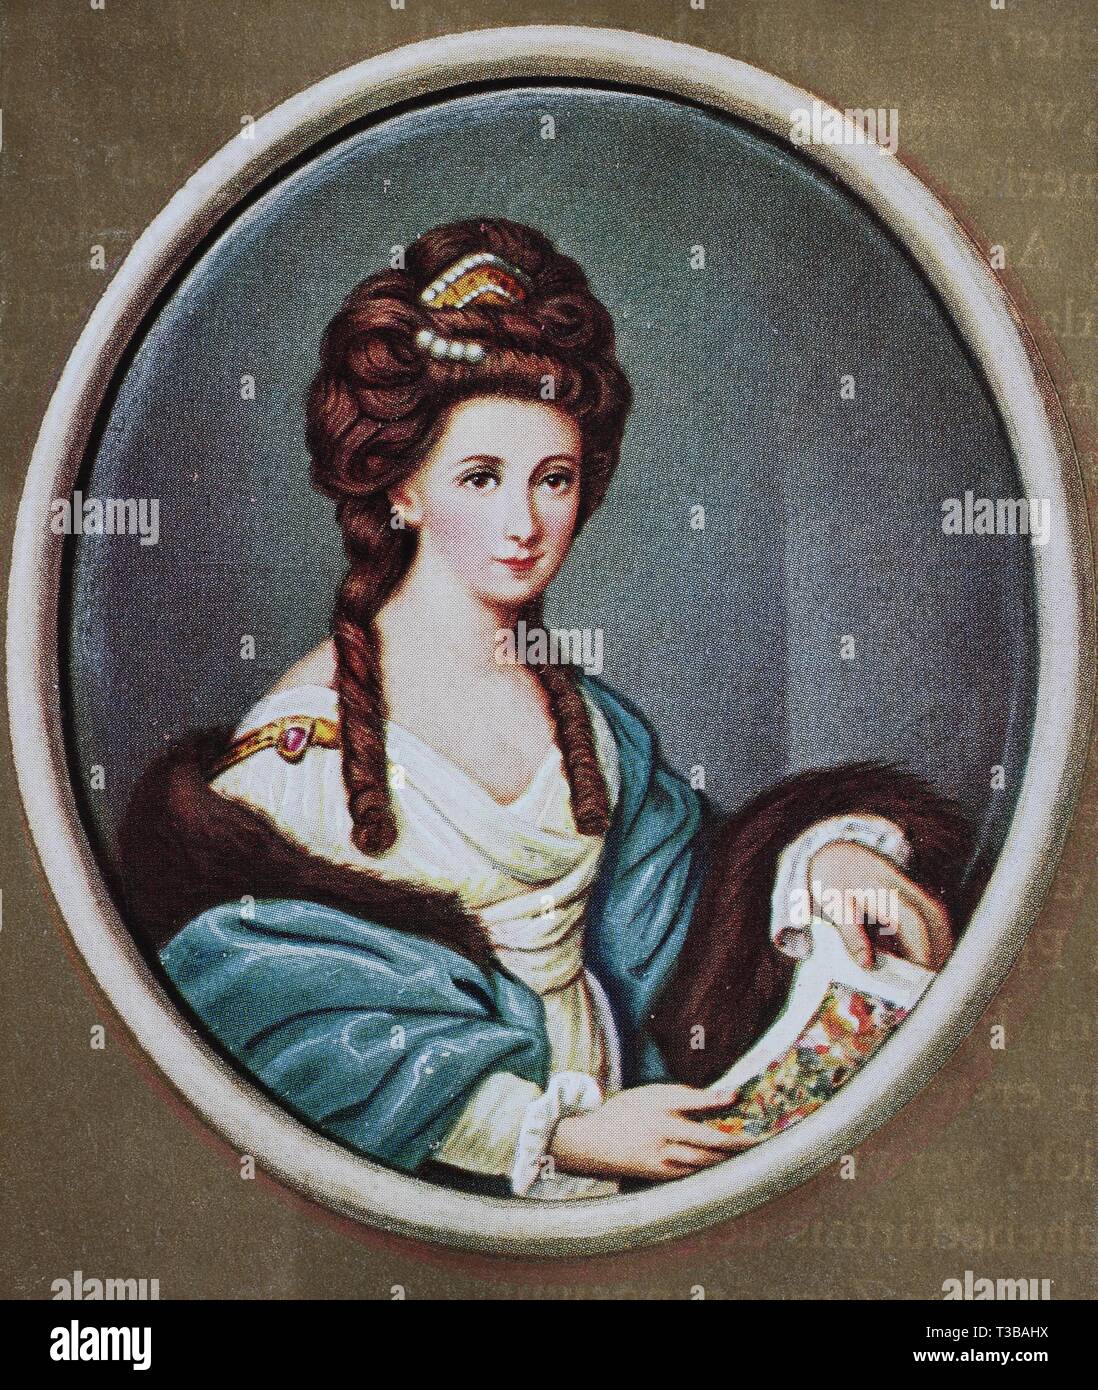 Maria Anna Angelika Kauffmann, 1741-1807, usually known in English as Angelica Kauffman was a Swiss Neoclassical painter who had a successful career i Stock Photo